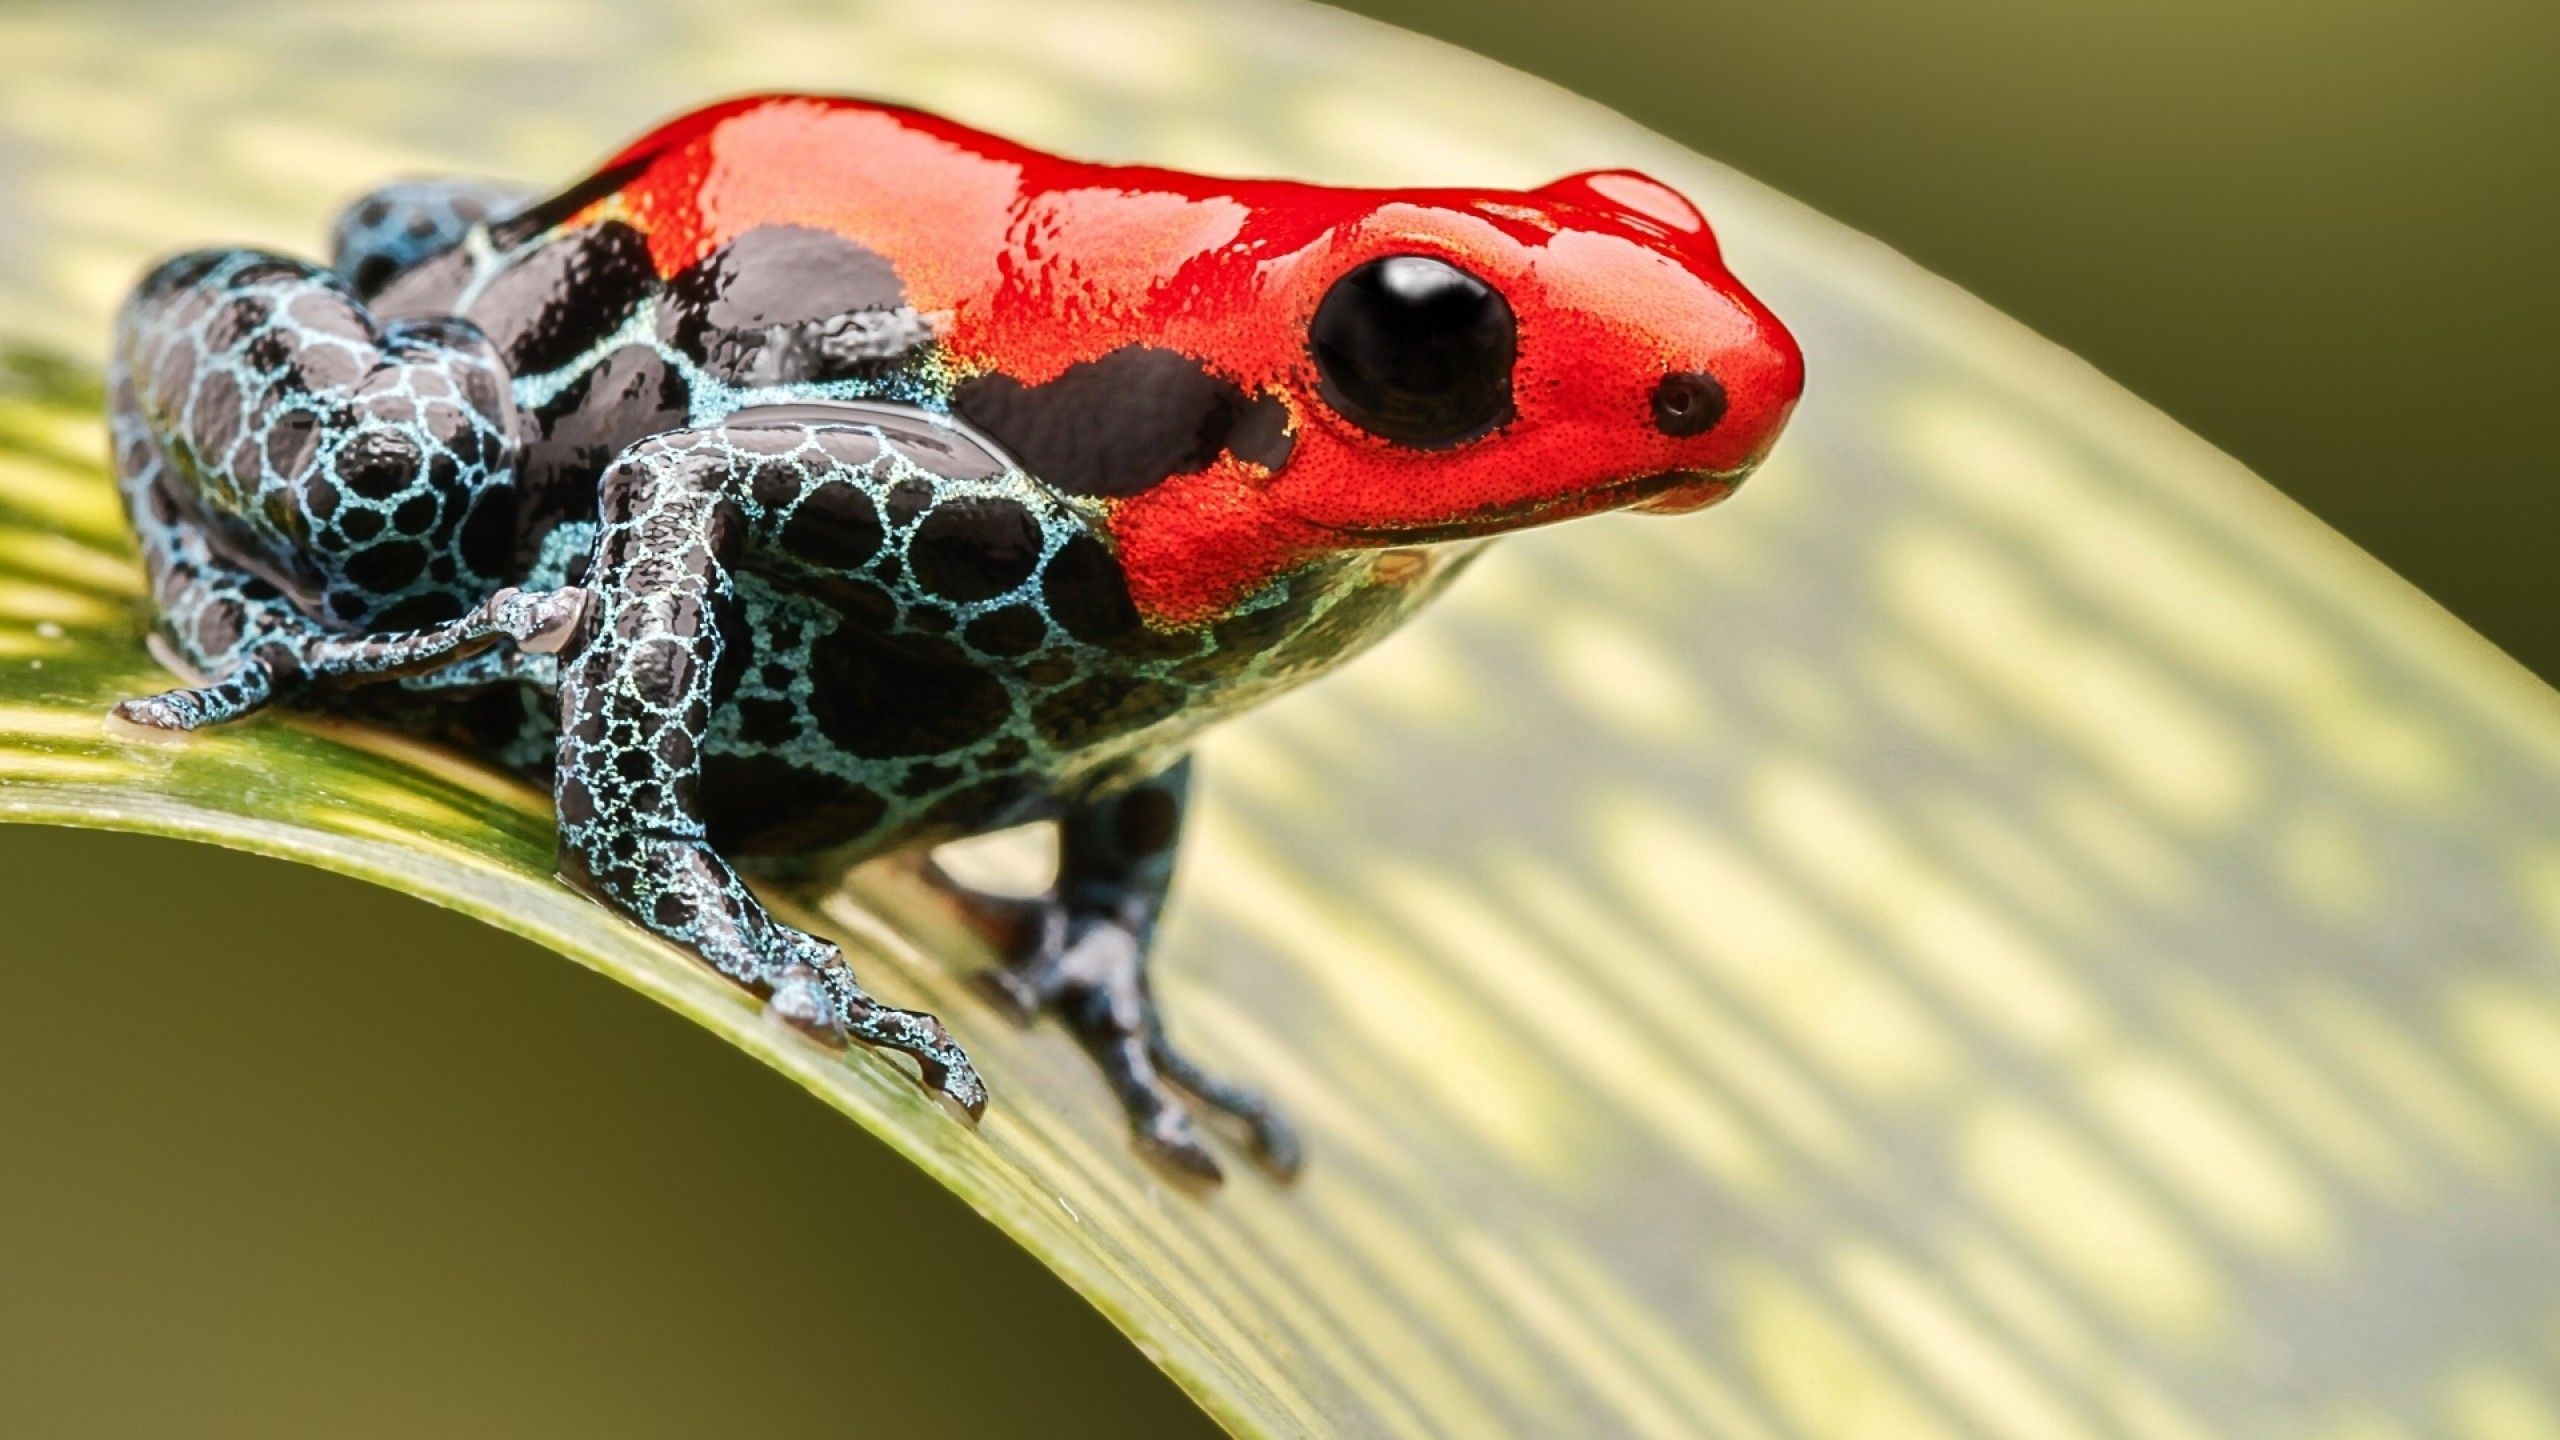 Poison dart frogs wallpapers, Colorful amphibians, Wallpaper collection, Animal photography, 2560x1440 HD Desktop